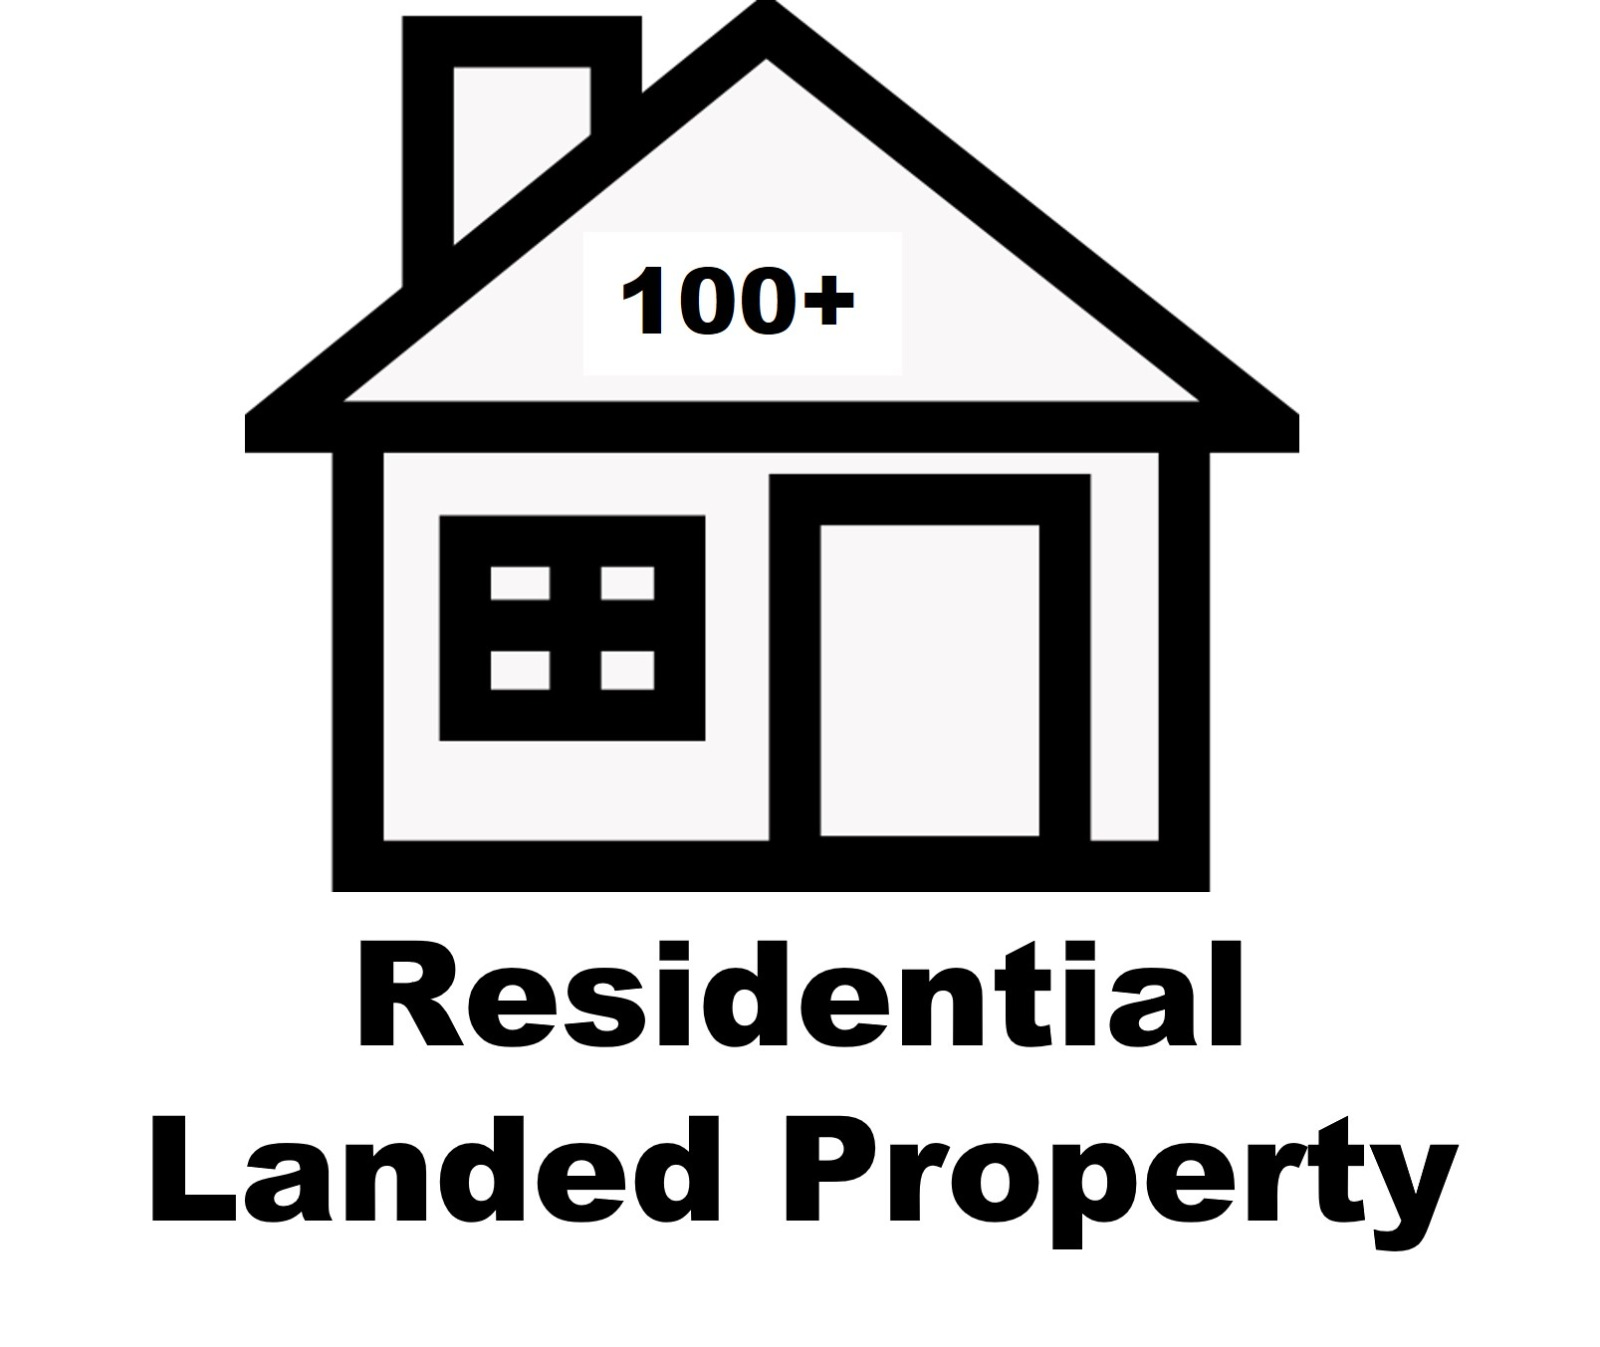 100+ Residential Landed Property